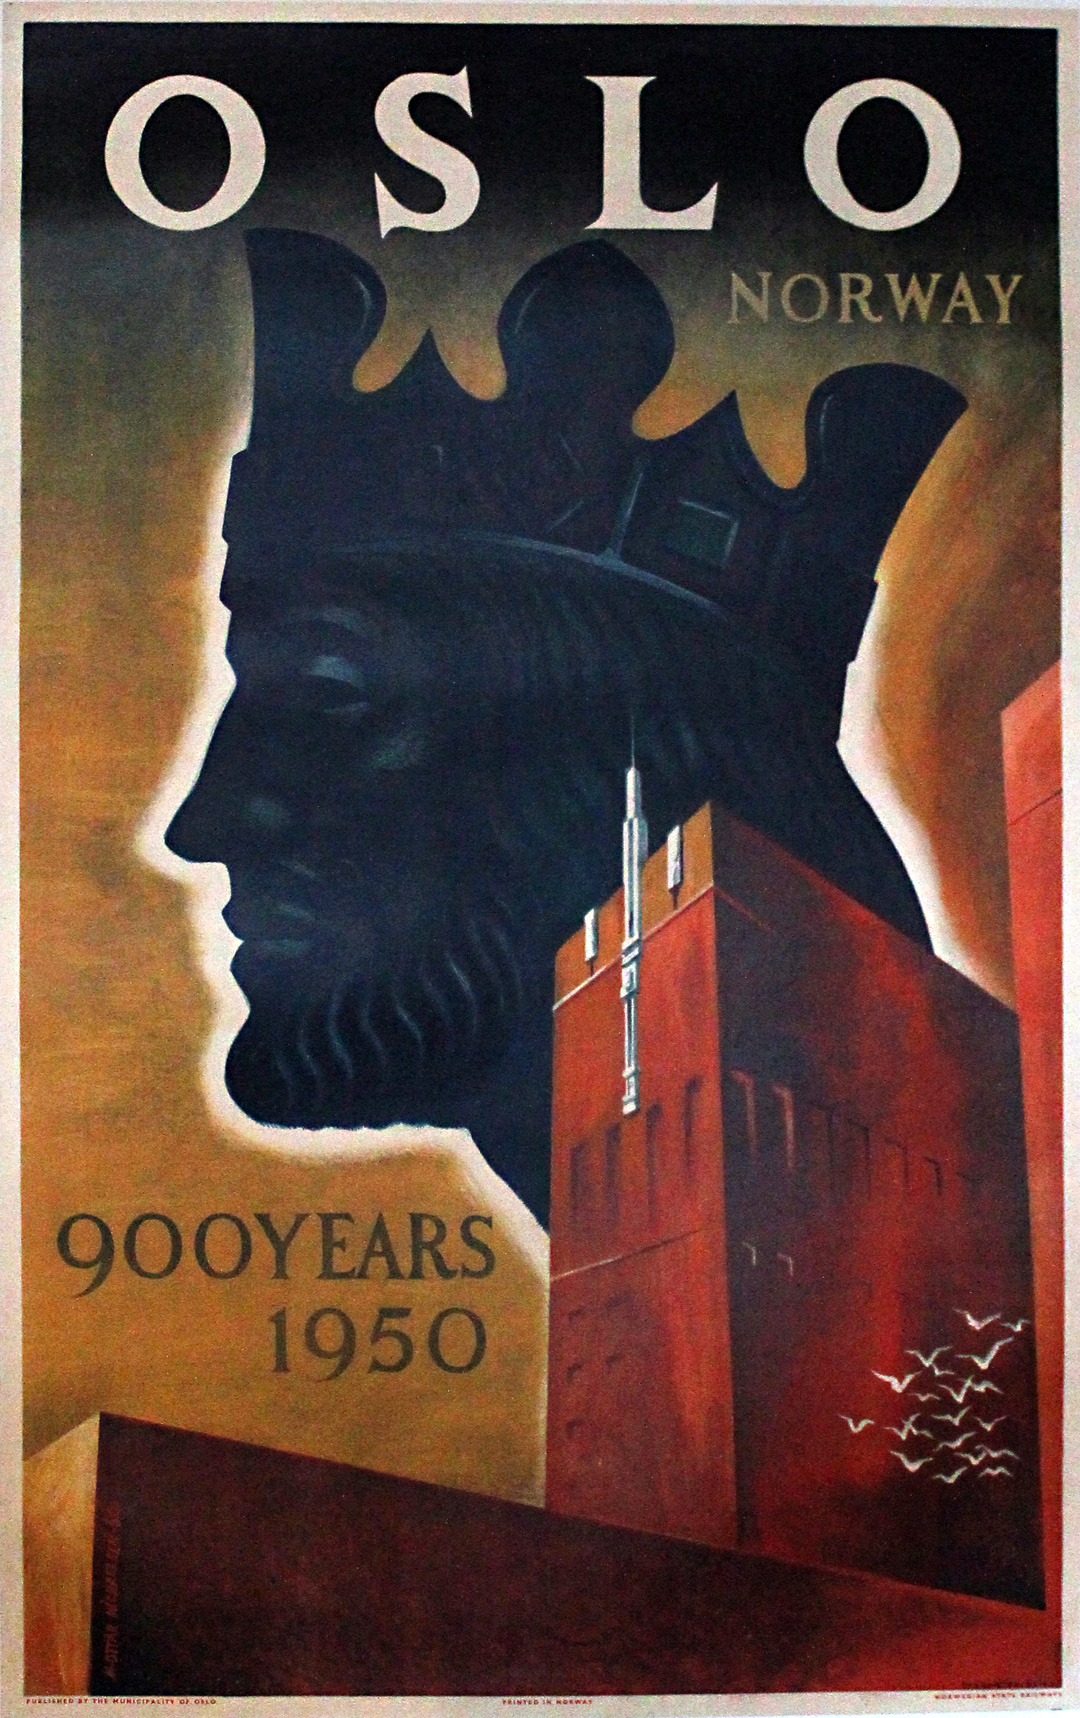 Original vintage poster: Oslo - Norway - 900 years 1950 for sale at